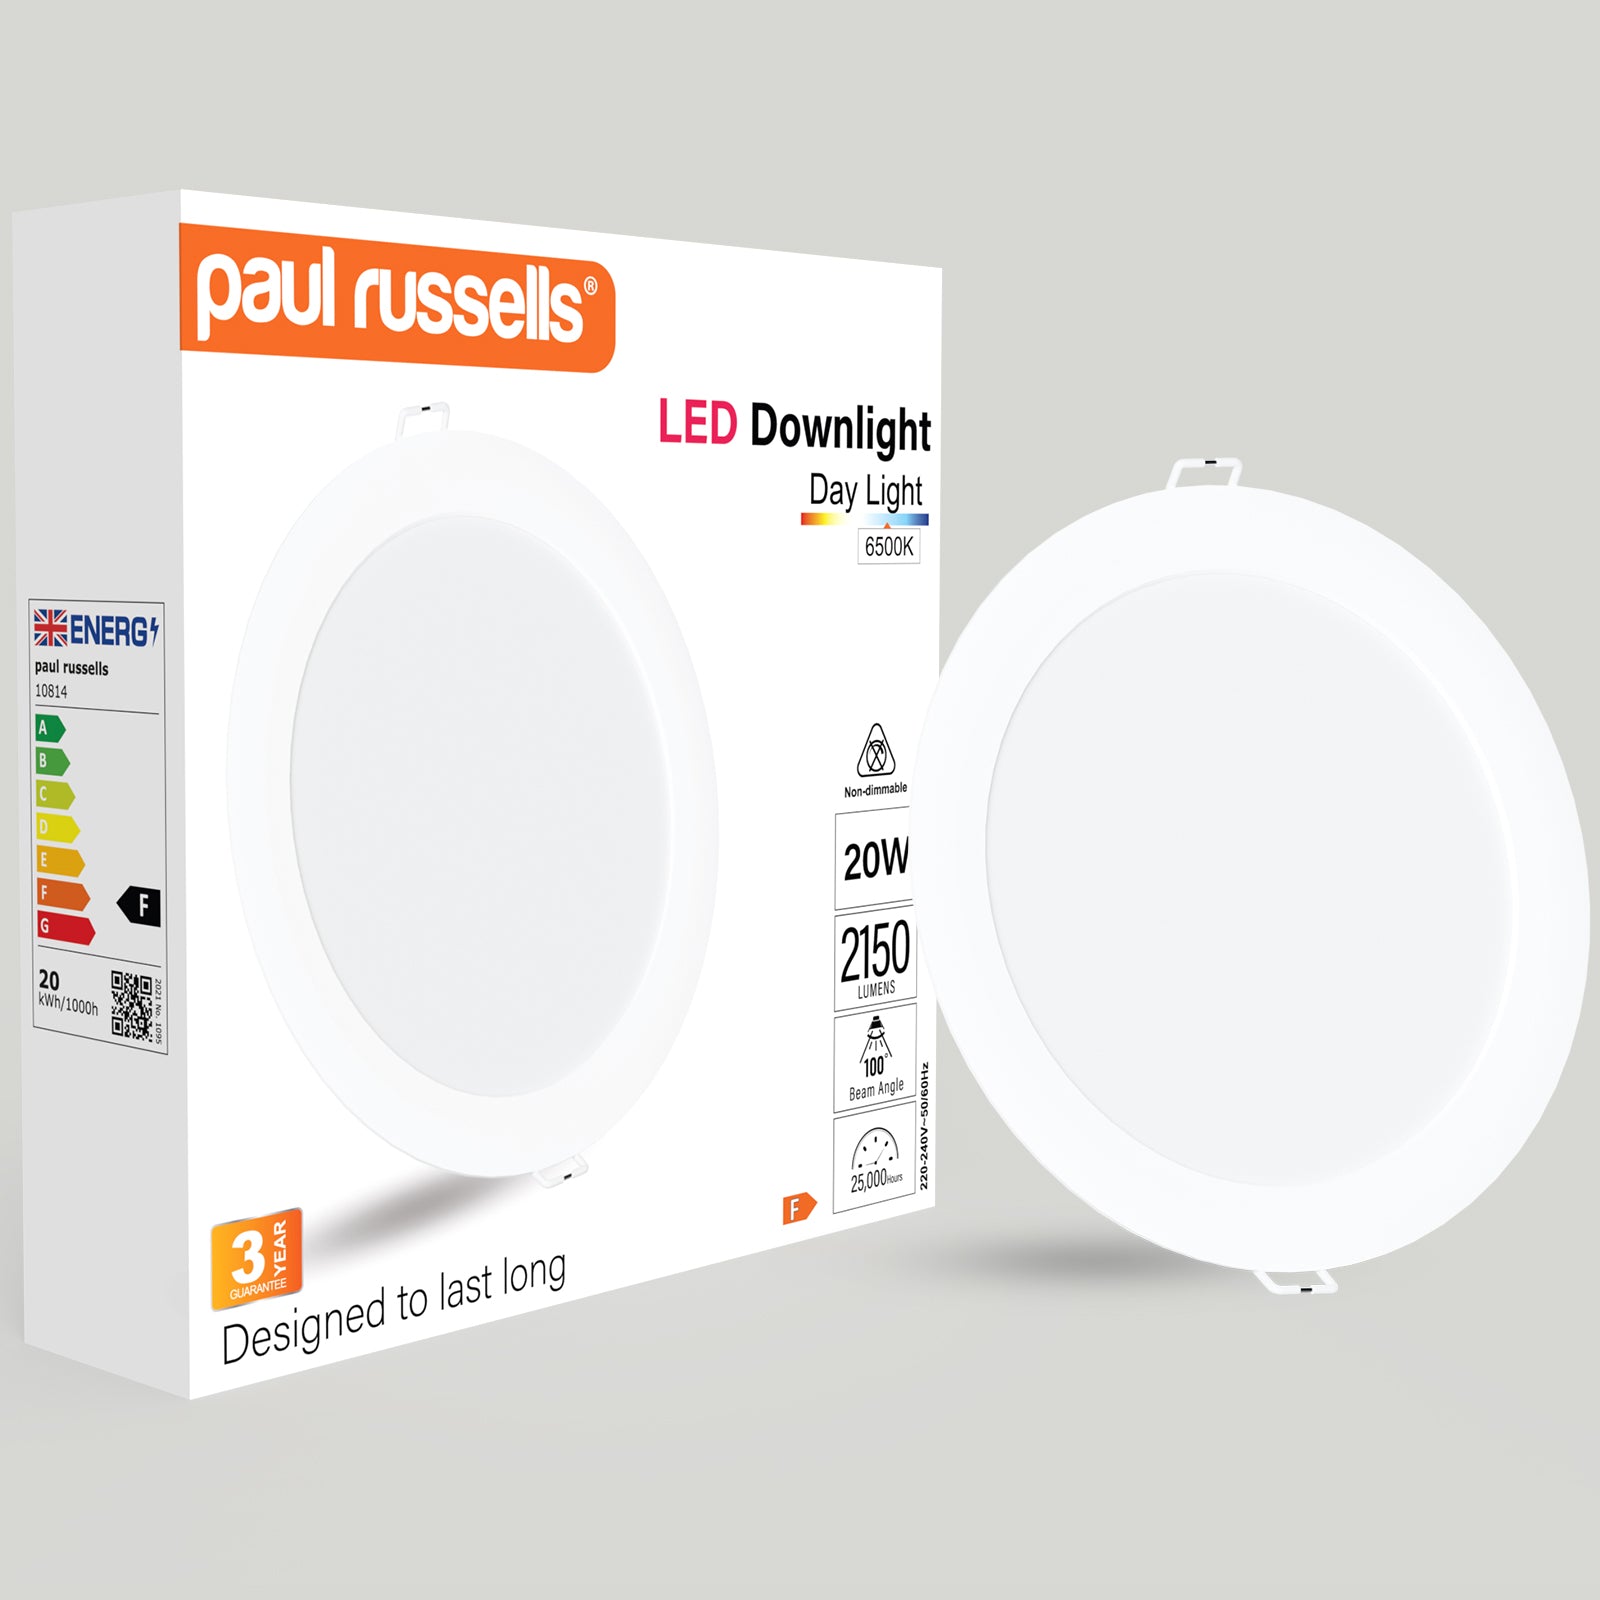 20W, LED Round Ceiling Downlights, 2150 Lumens, 6500K Day Light, Non-Dimmable Panel Spotlights